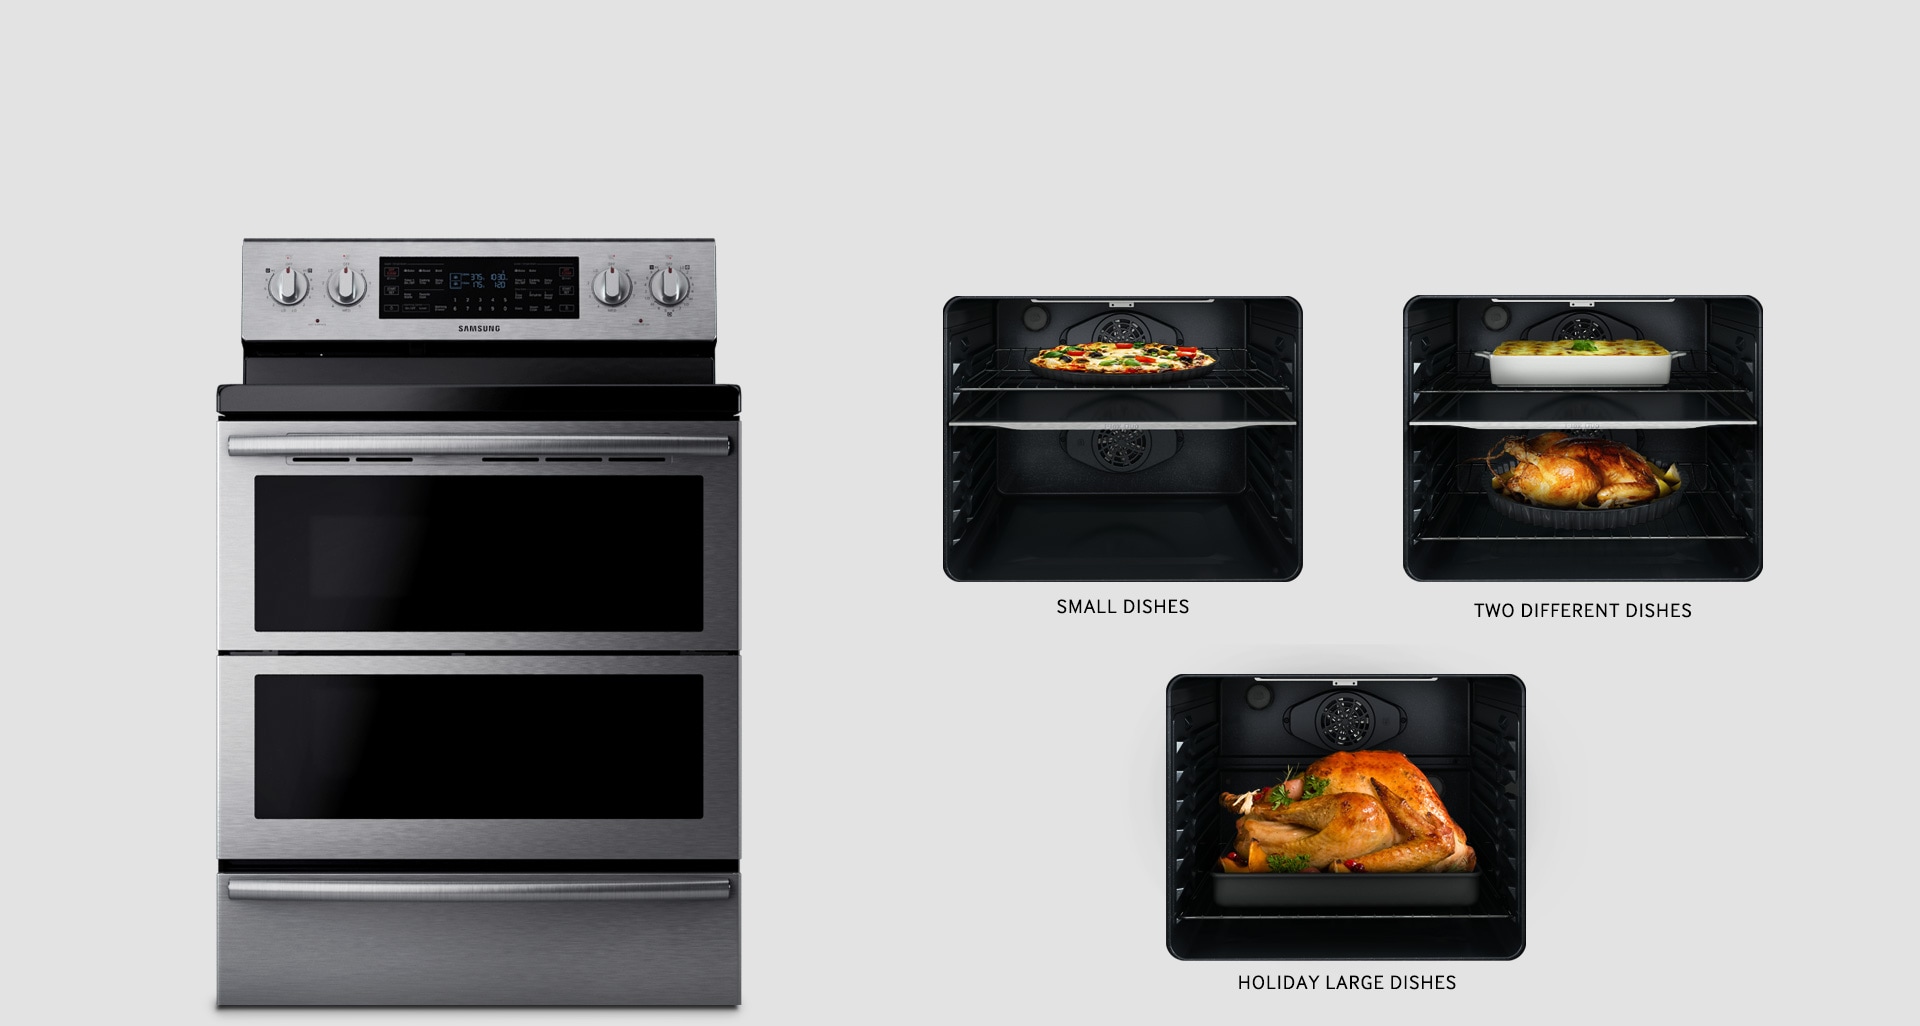 Three ovens in one